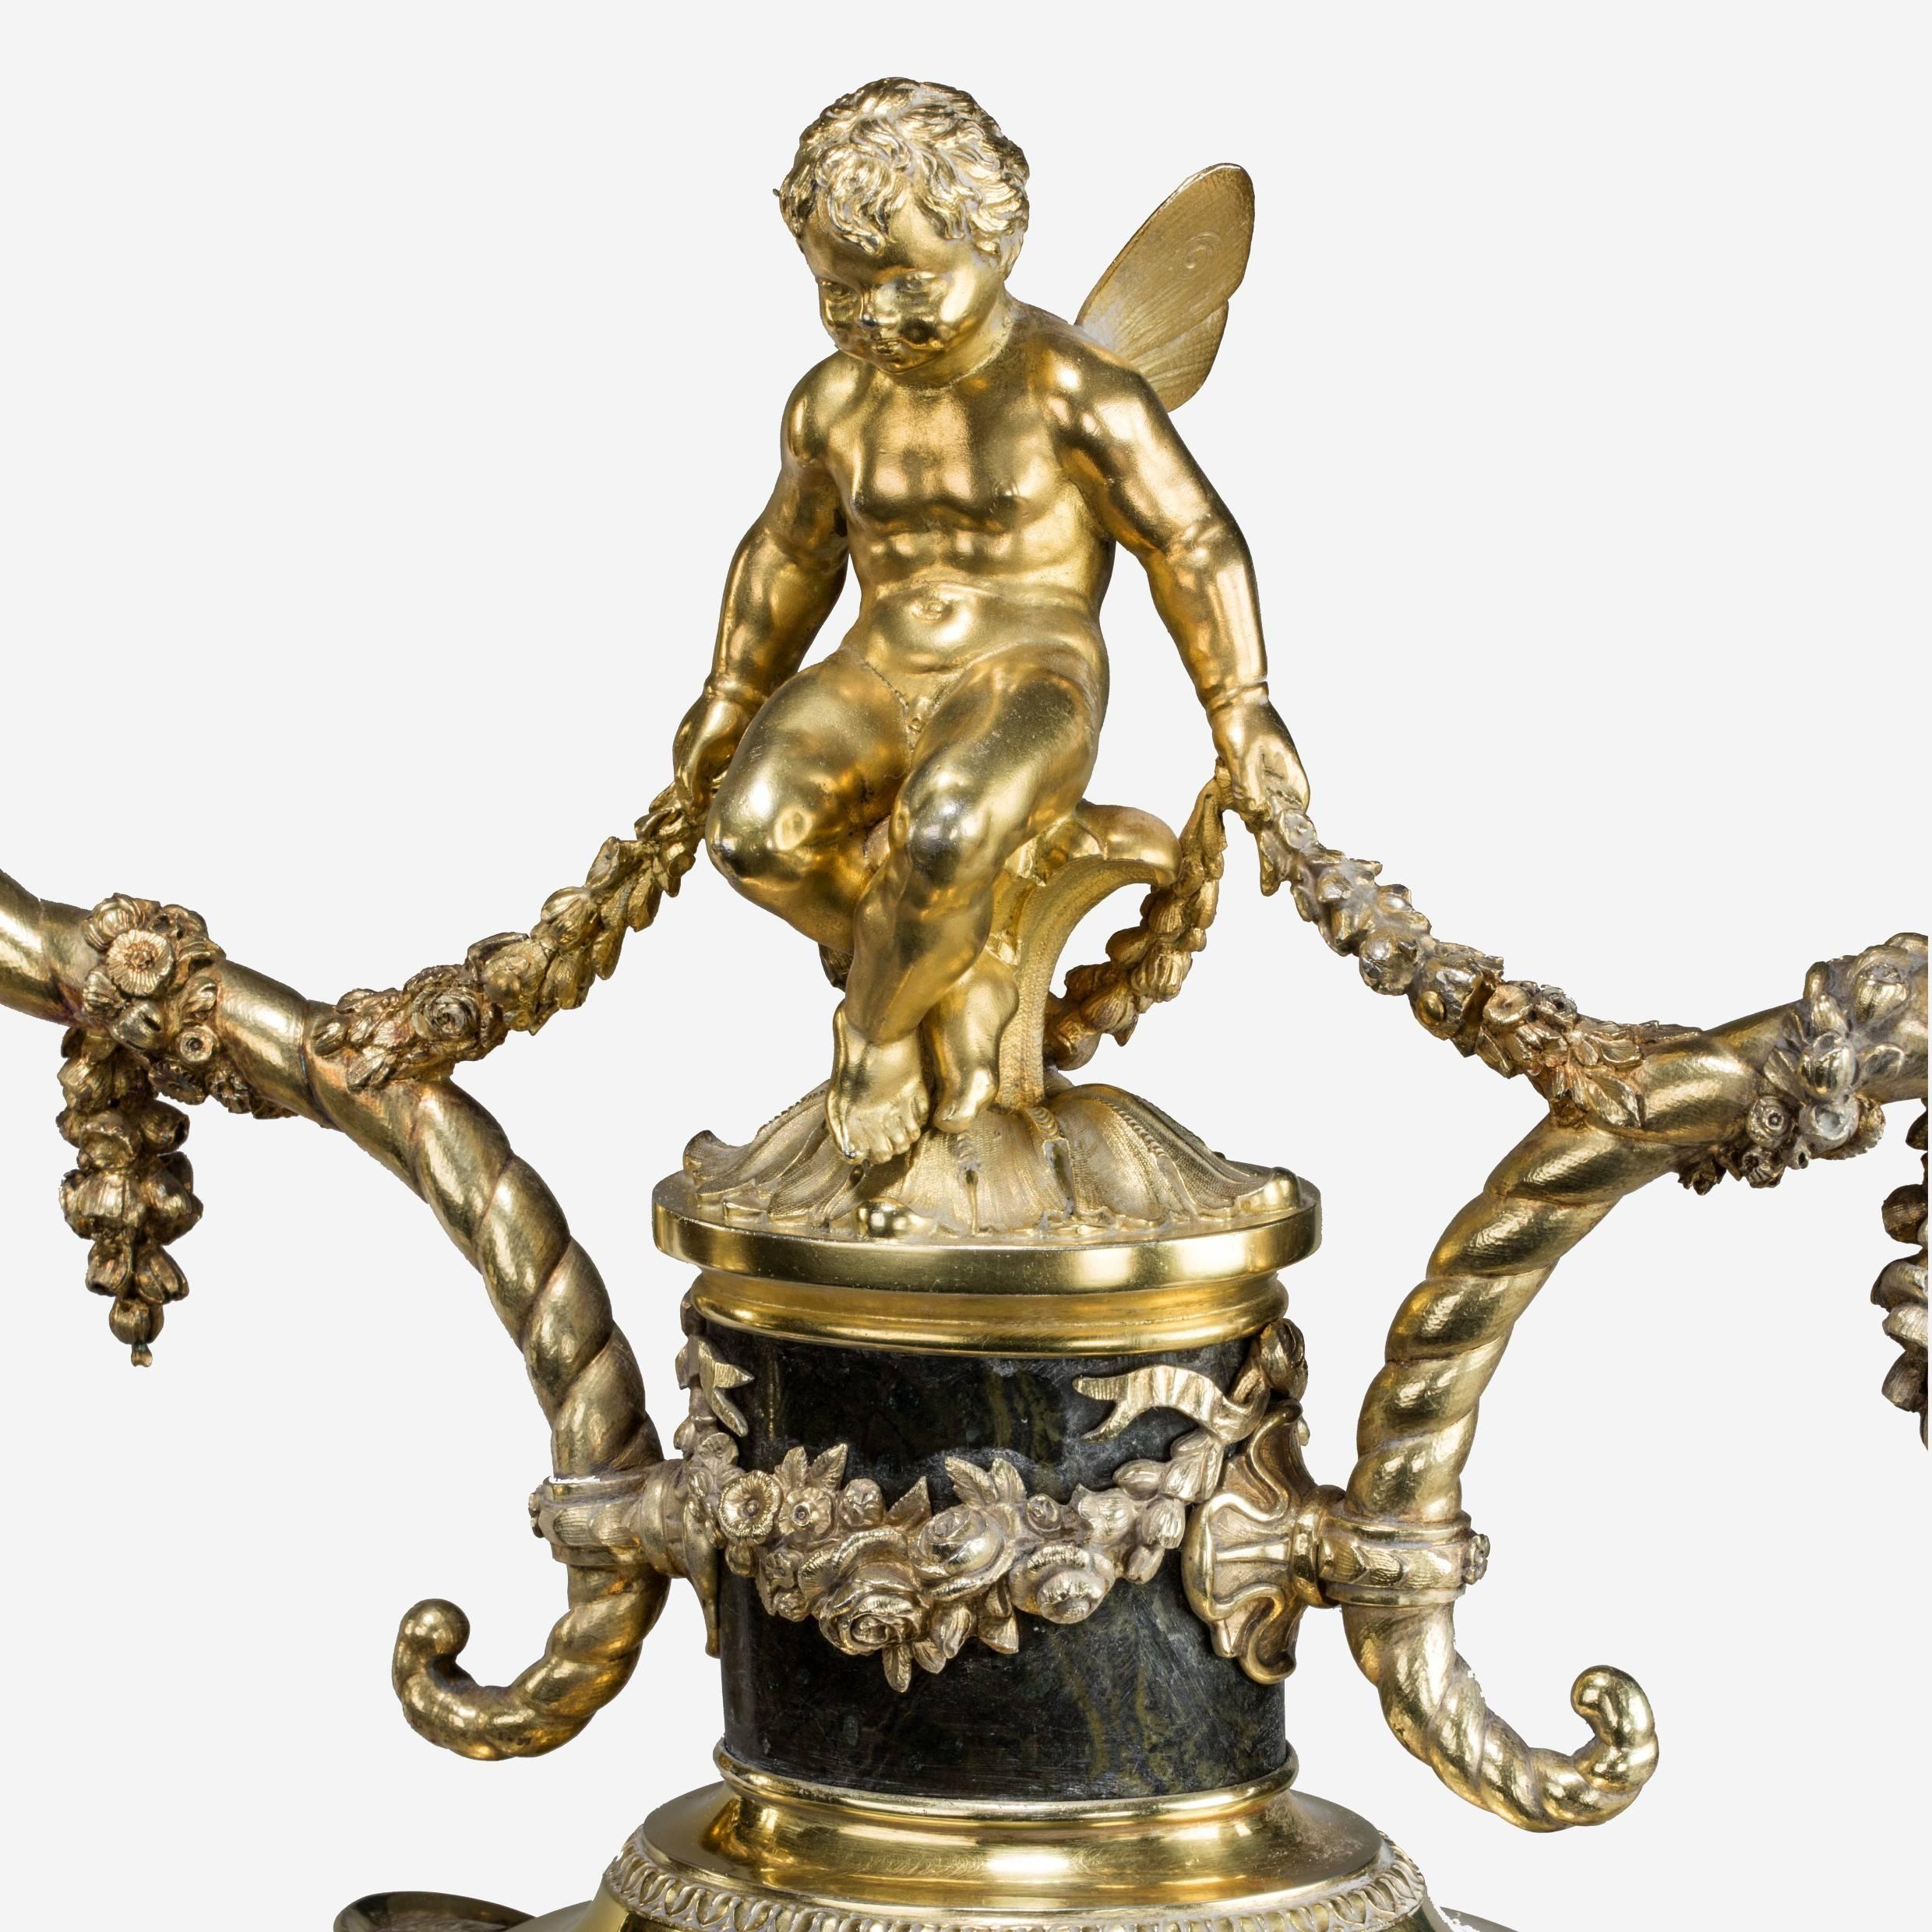 A superb pair of Victorian silver gilt candelabra,
each comprising a serpentine footed urn supporting a winged cherub sitting on two cornucopia festooned with floral garlands, applied with classical mounts in the form of Grecian goddess masks,